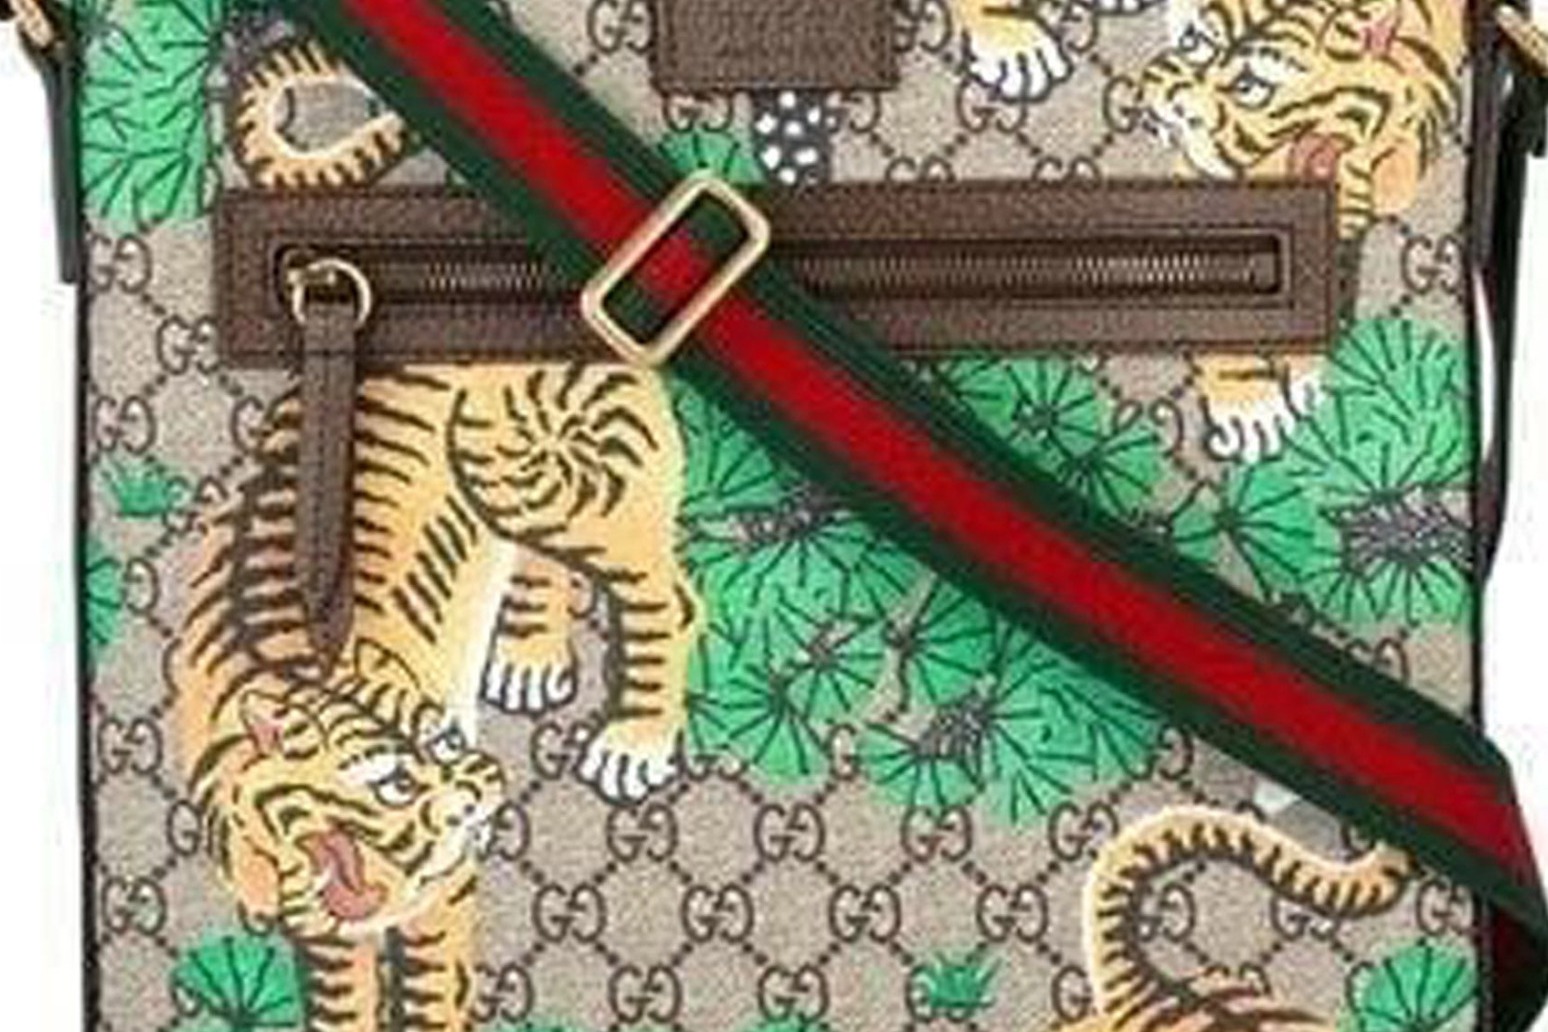 Detectives search for Gucci bag as clue to \'frenzied\' murder 